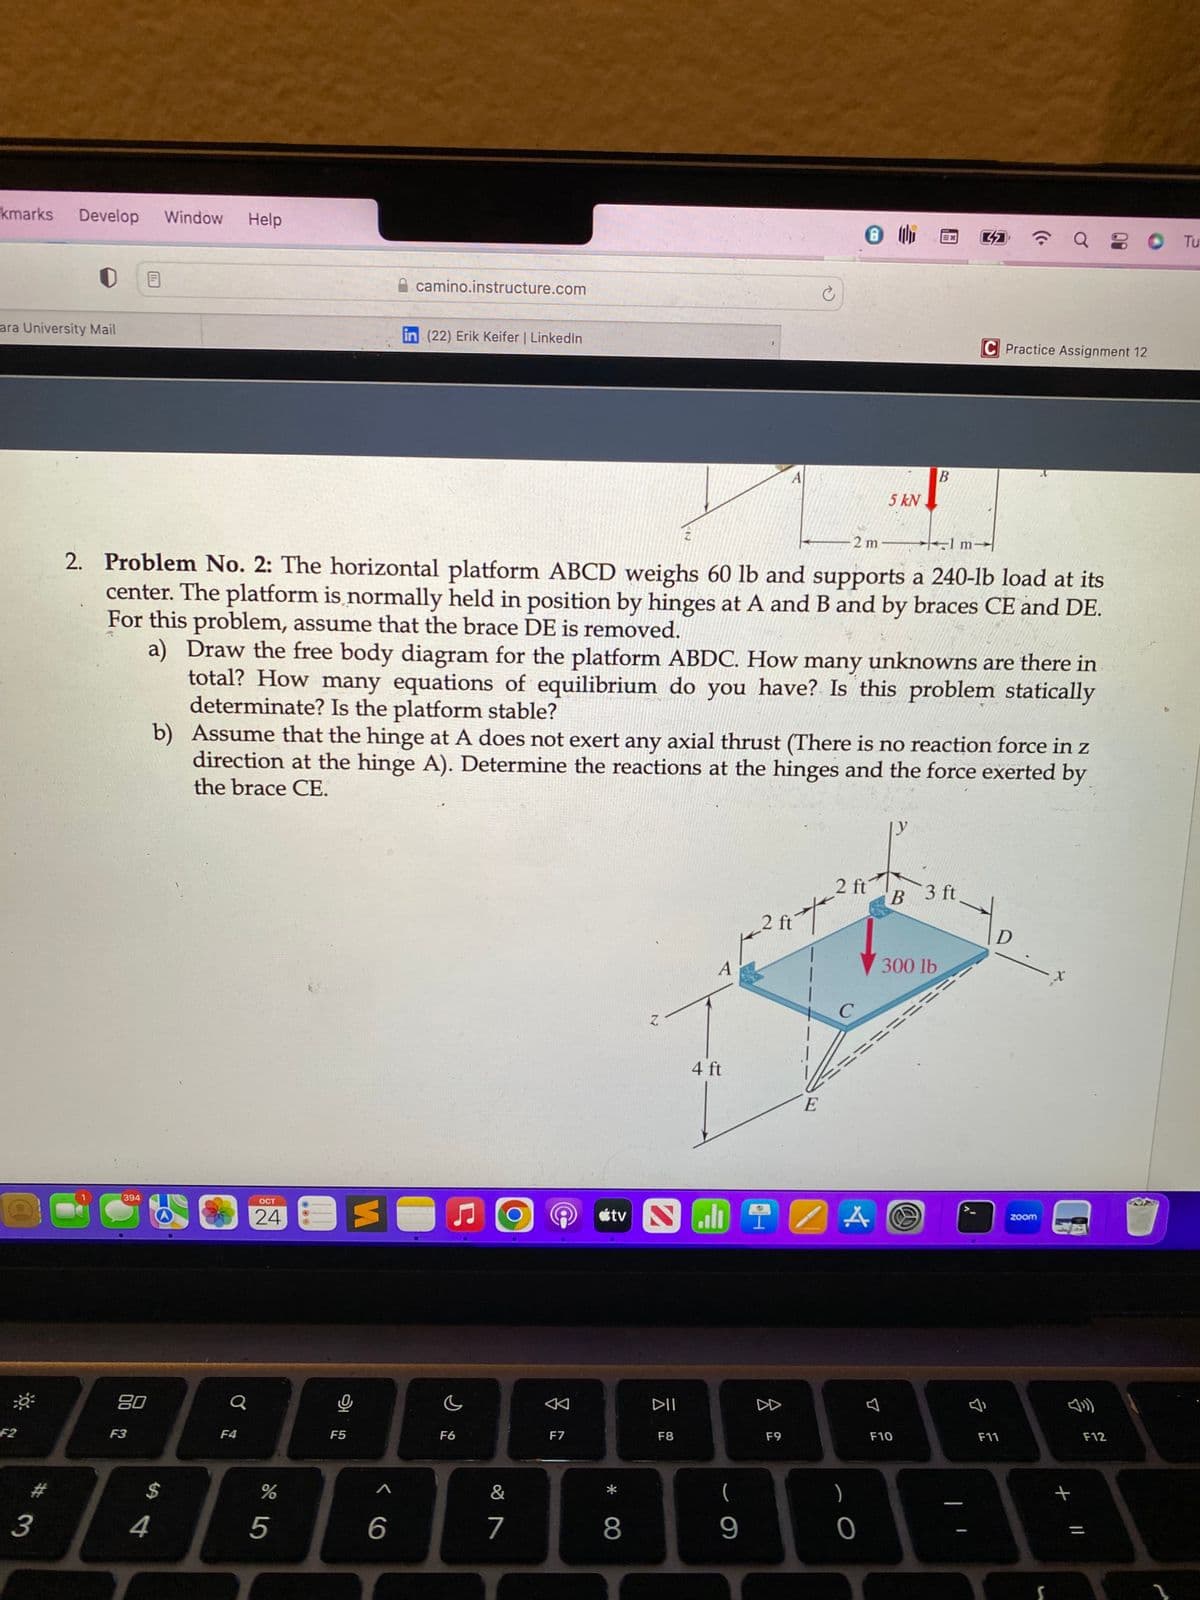 kmarks Develop Window Help
ara University Mail
F2
394
A
80
F3
#
34
$
Q
F4
2 m
1 m
2. Problem No. 2: The horizontal platform ABCD weighs 60 lb and supports a 240-lb load at its
center. The platform is normally held in position by hinges at A and B and by braces CE and DE.
For this problem, assume that the brace DE is removed.
OCT
24 O
%
5
p
camino.instructure.com
F5
in (22) Erik Keifer | LinkedIn
a) Draw the free body diagram for the platform ABDC. How many unknowns are there in
total? How many equations of equilibrium do you have? Is this problem statically
determinate? Is the platform stable?
b) Assume that the hinge at A does not exert any axial thrust (There is no reaction force in z
direction at the hinge A). Determine the reactions at the hinges and the force exerted by
the brace CE.
A
6
F6
&
7
A
F7
*
Z
8
DII
A
F8
4 ft
A
(
9
2 ft
8
Ć
tv NEIZA
F9
*
E
2 ft
C
5 kN
0
0
B
EX
300 lb
B
F10
======
@
32
3 ft
C Practice Assignment 12
J
D
F11
Q 20 Tu
zoom
S
+ 11
F12
1